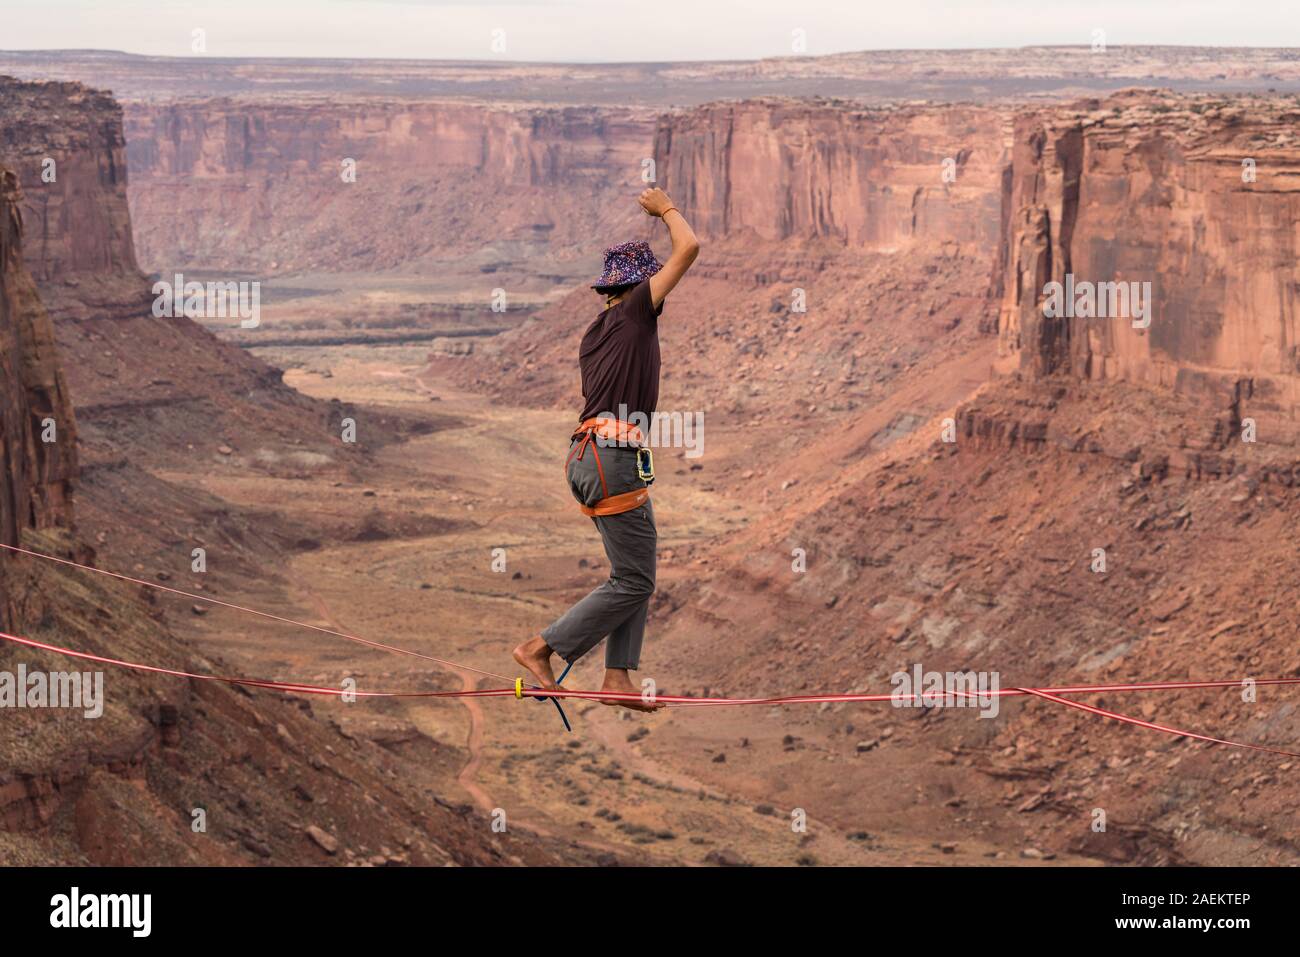 A young man slacklining or highlining hundreds of feet above Mineral Canyon near Moab, Utah during a highline gathering. Stock Photo